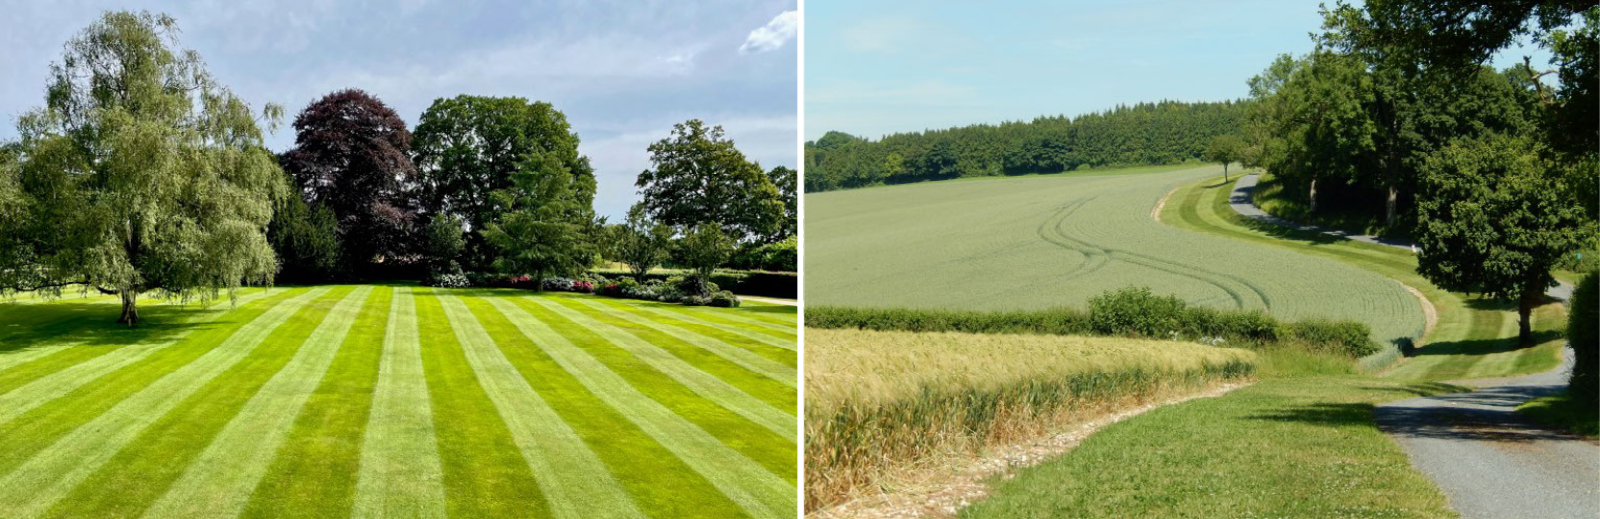 Mown Lawn and Field Boundaries